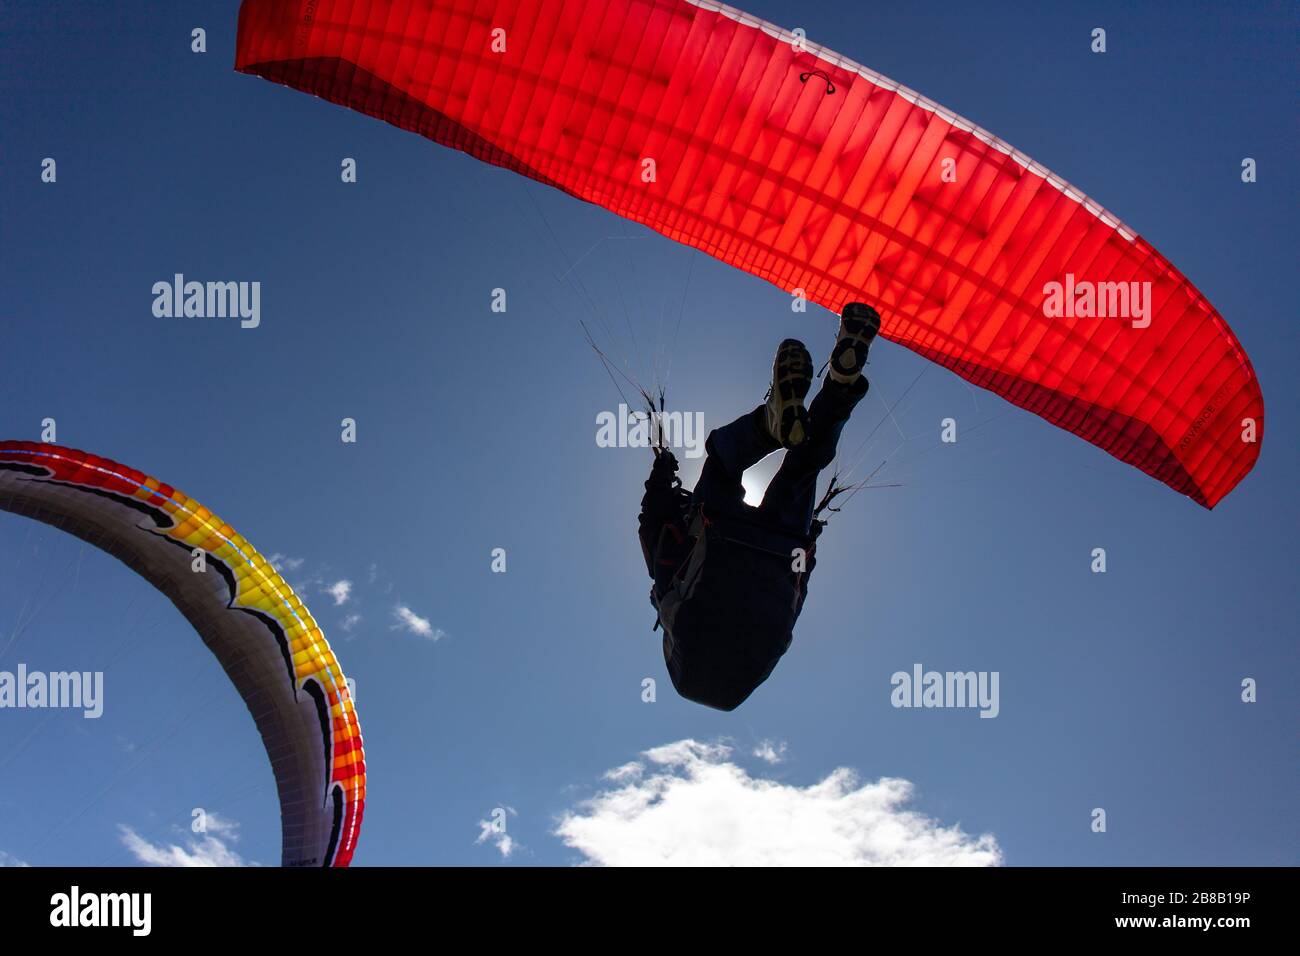 Paraglider silhouette Stock Photo